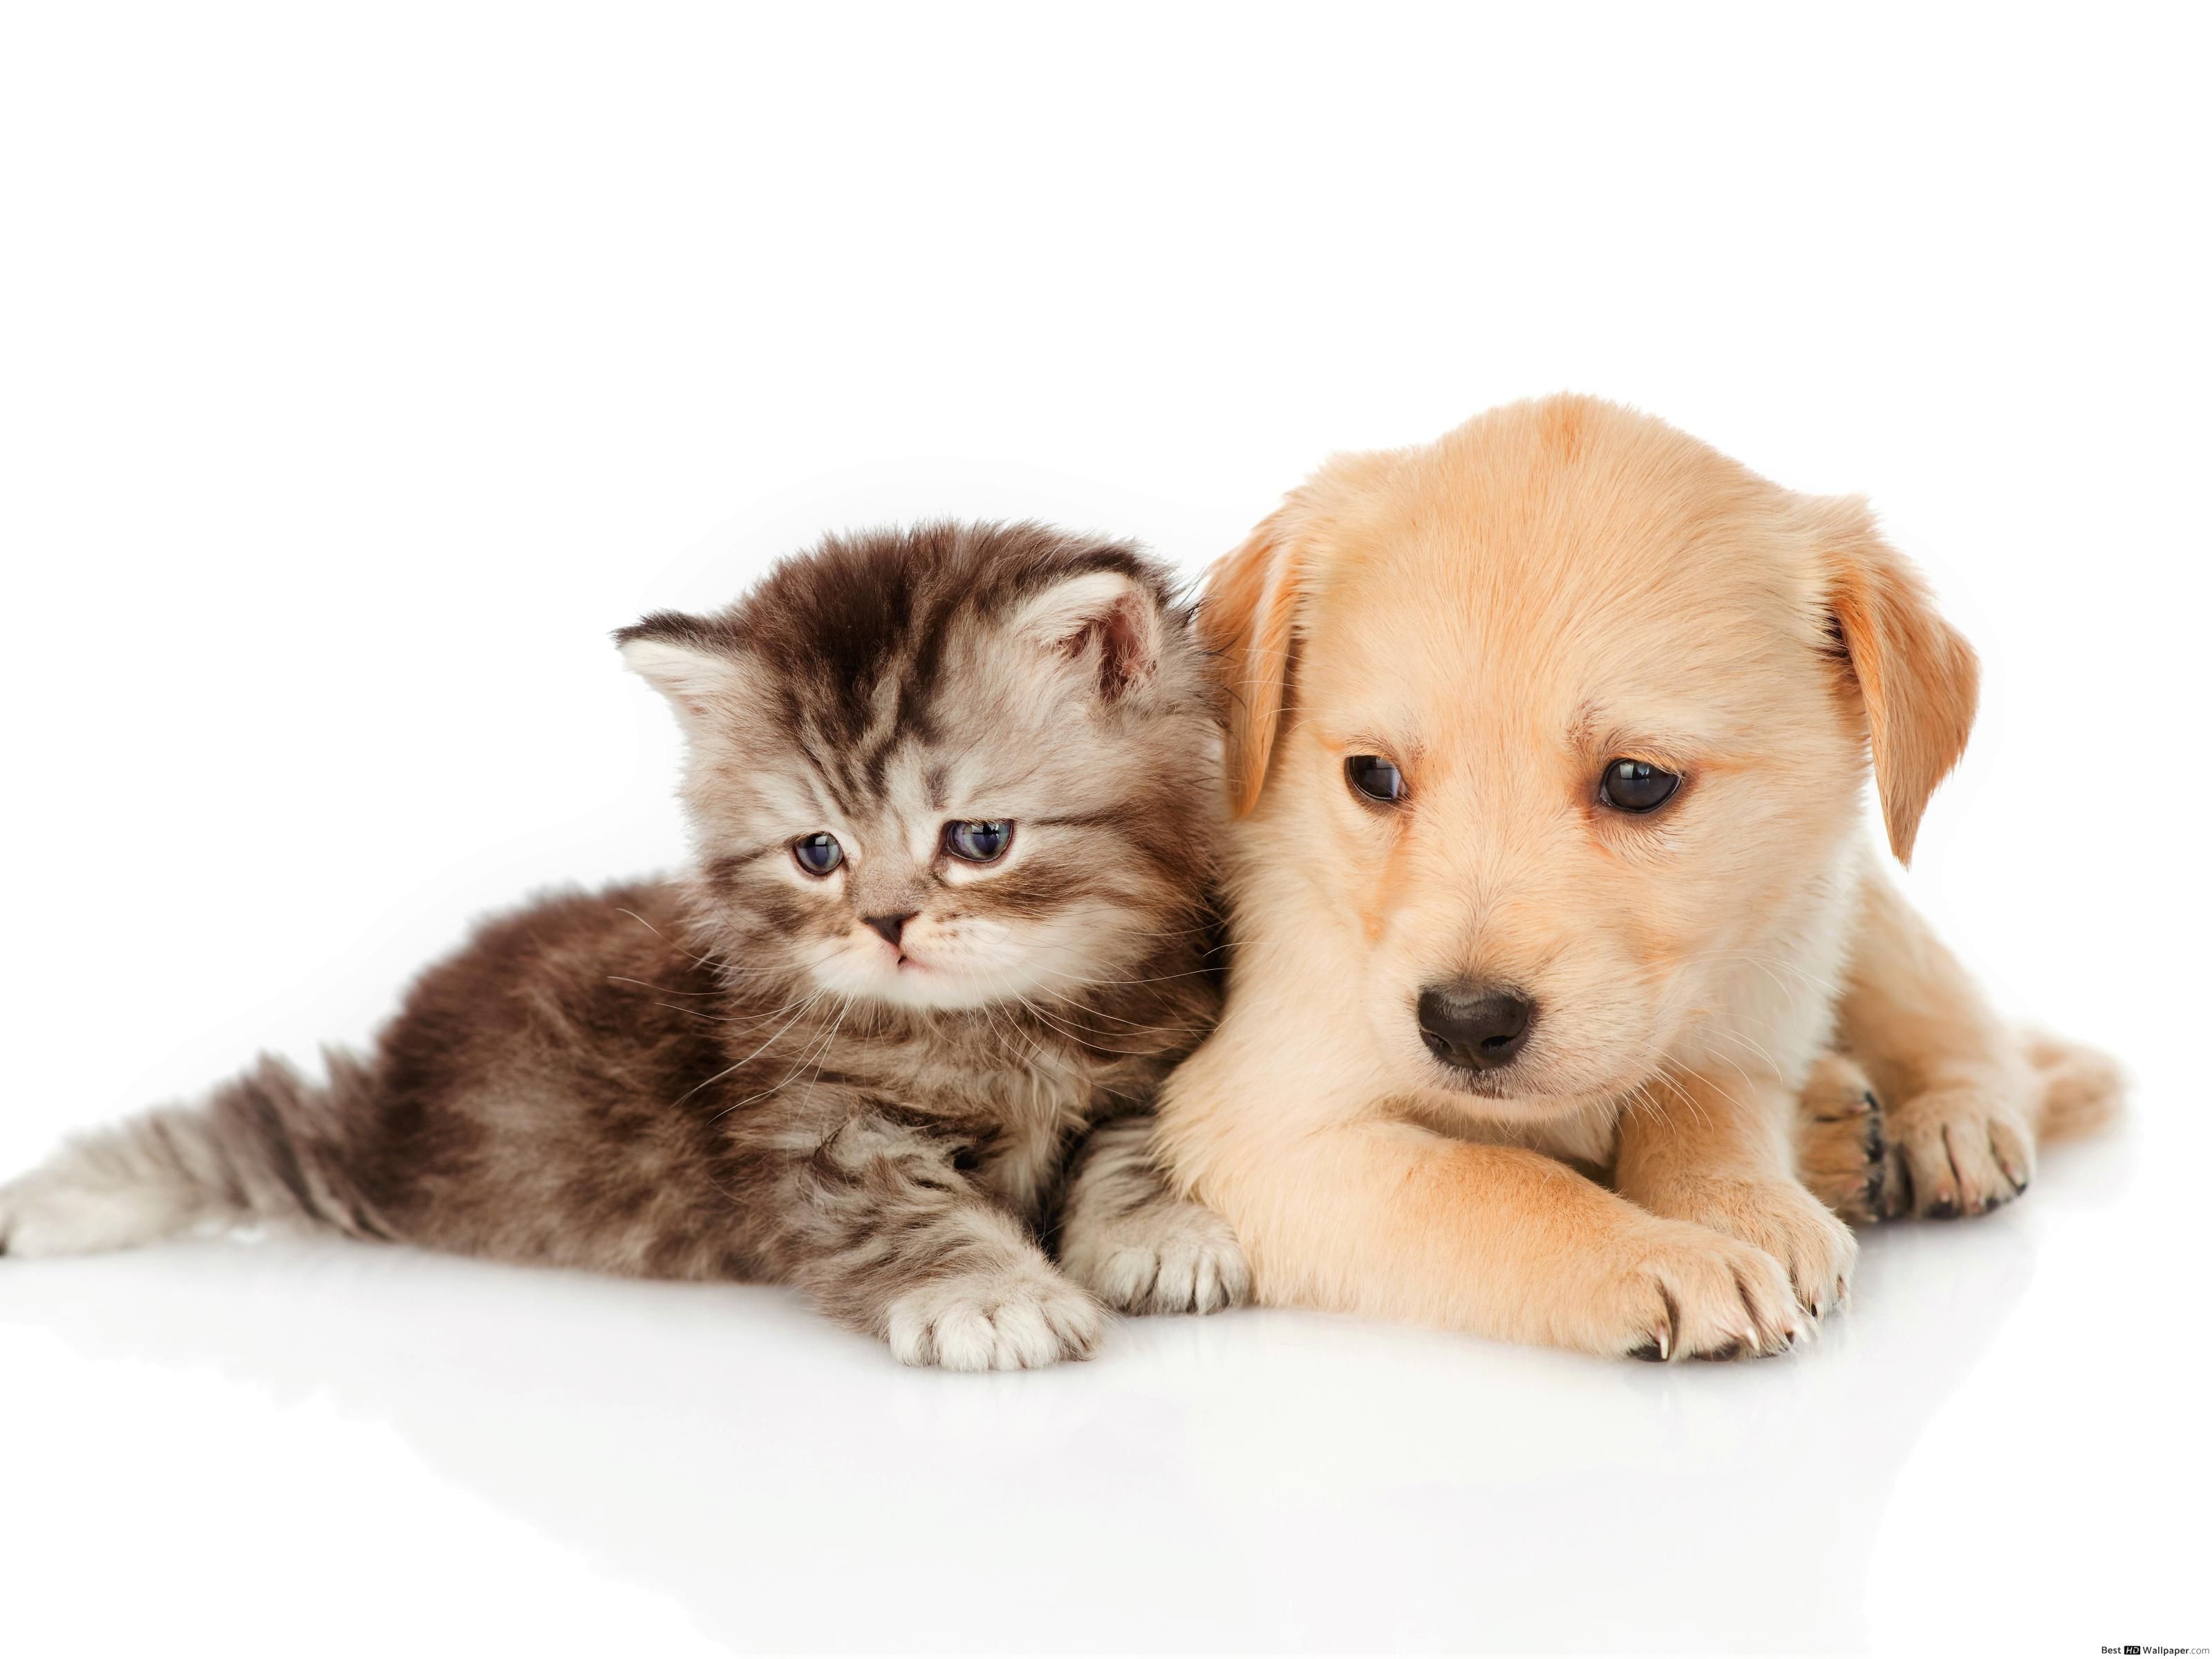 Cute Puppies And KittensWallpapers